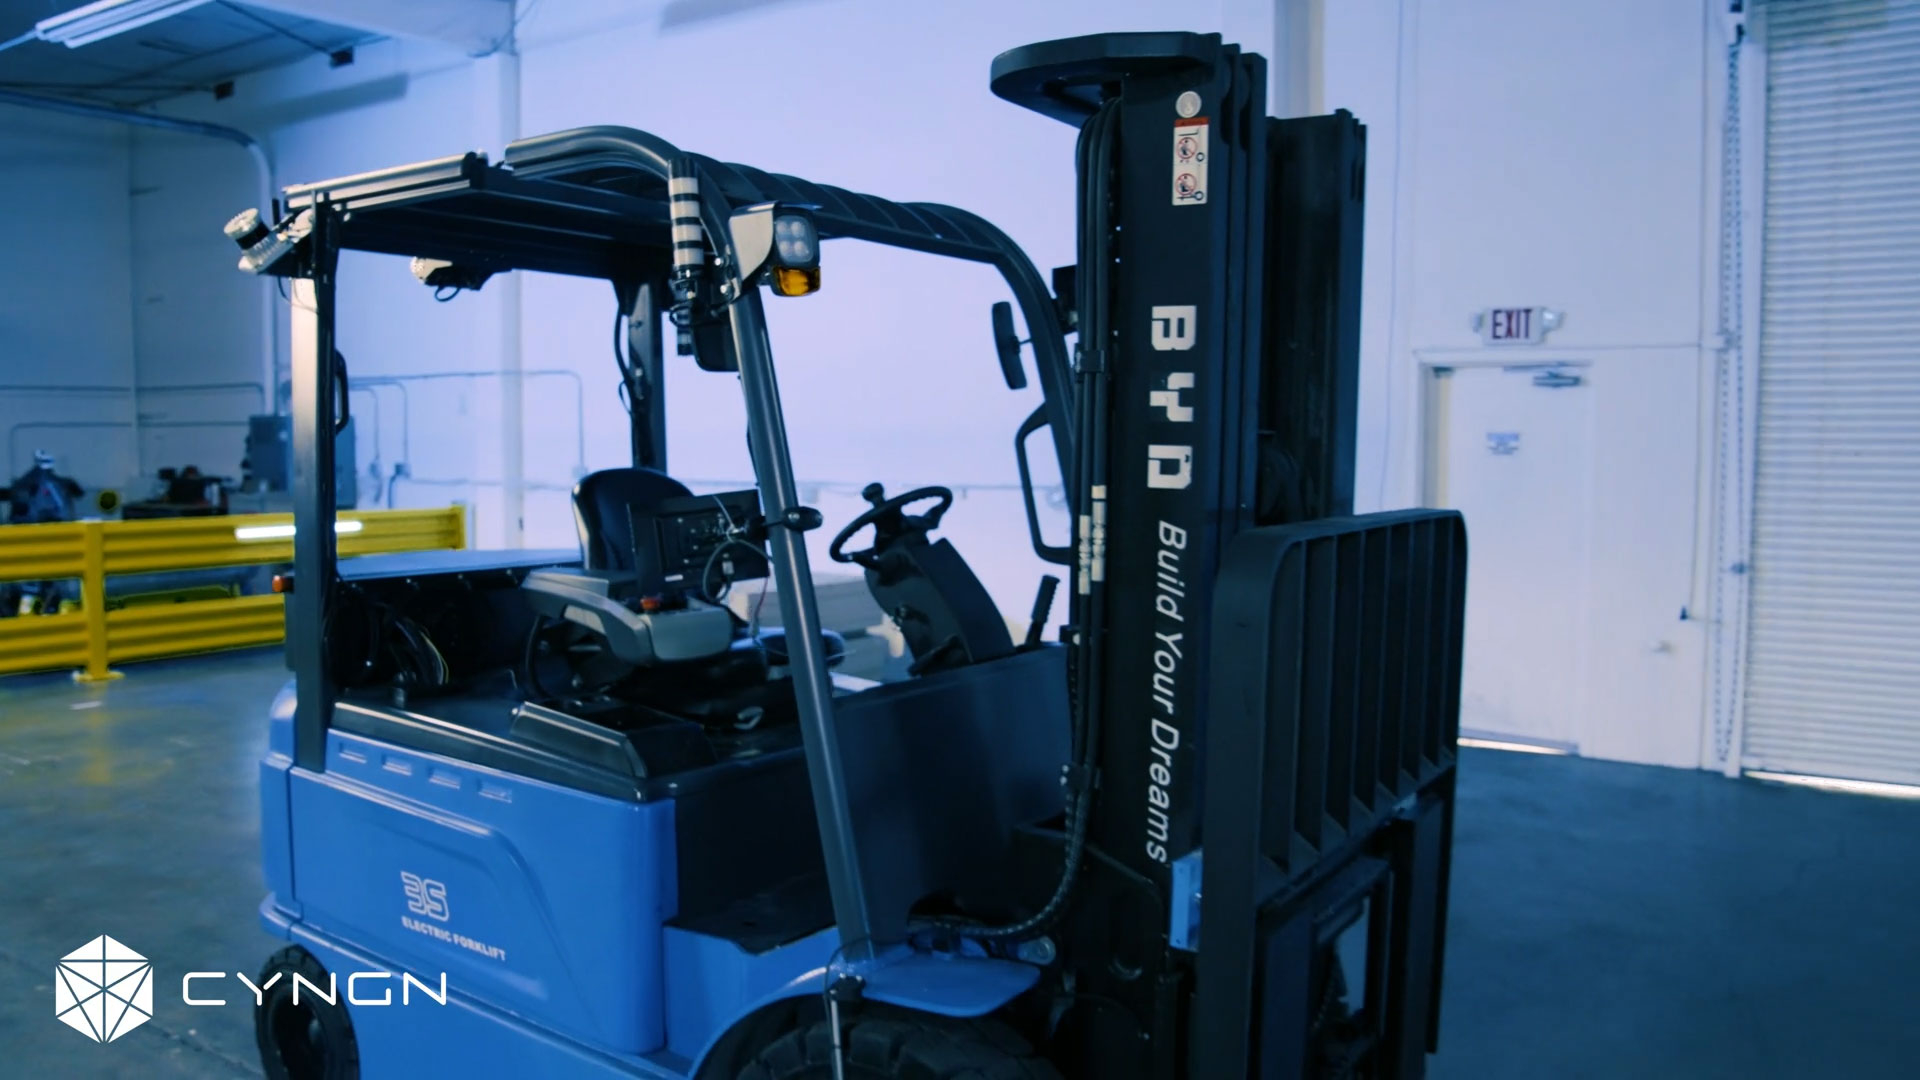 Cyngn - BYD Forklift Autonomous Mode